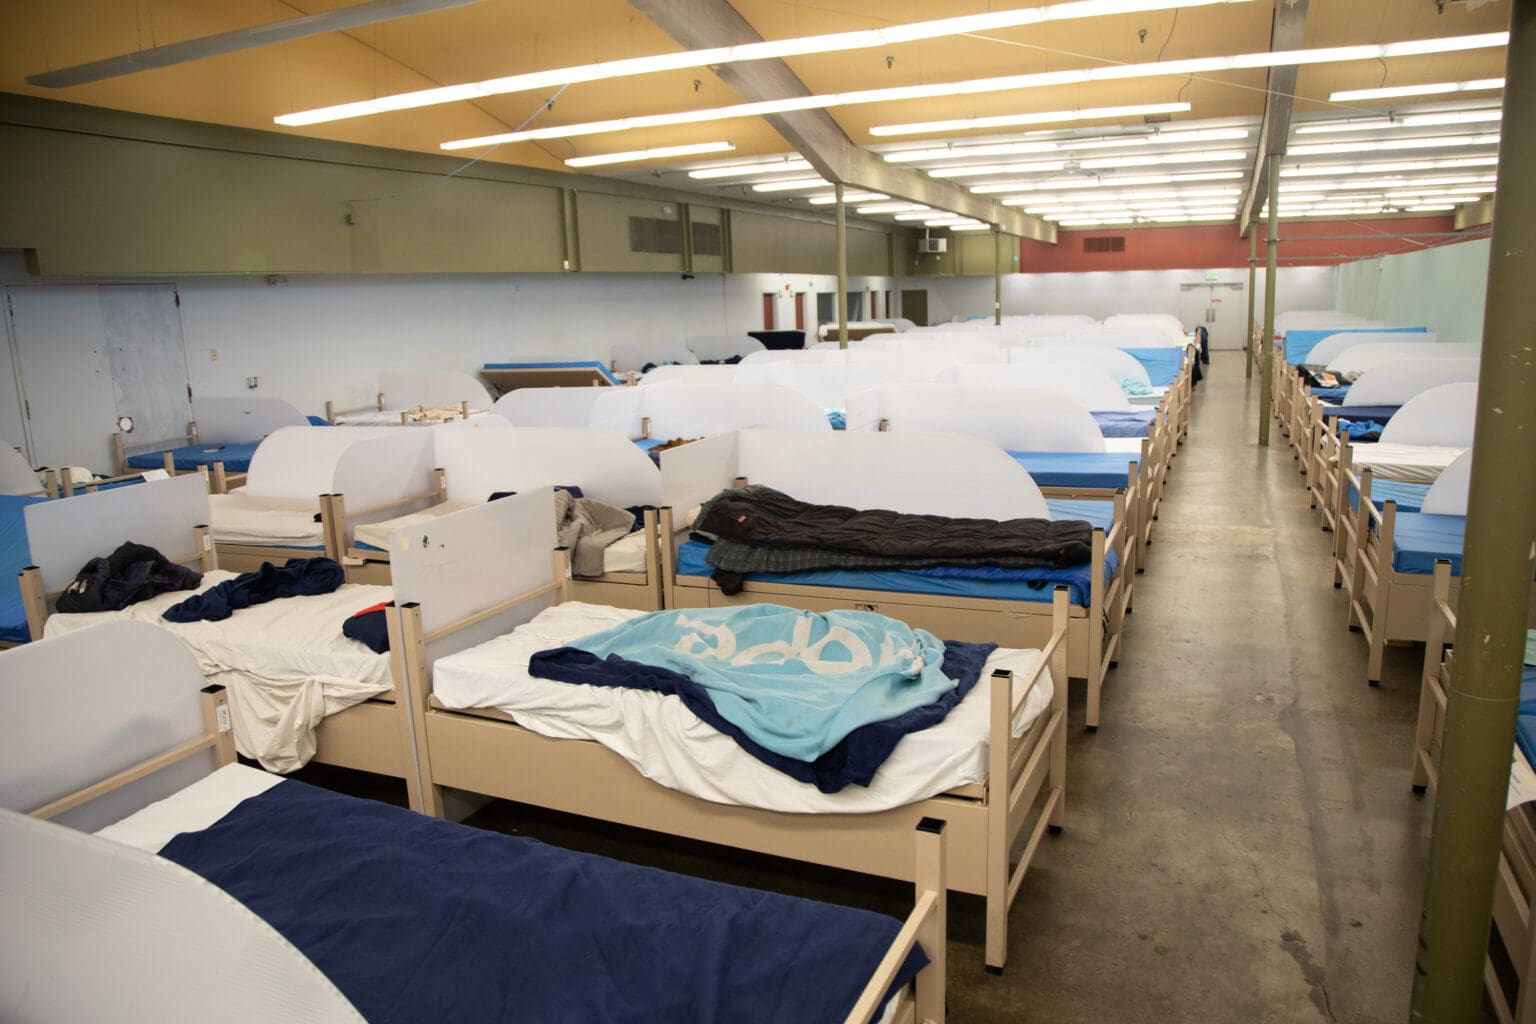 Beds with different comforters and blankets fill the men's dorm of the Base Camp shelter.